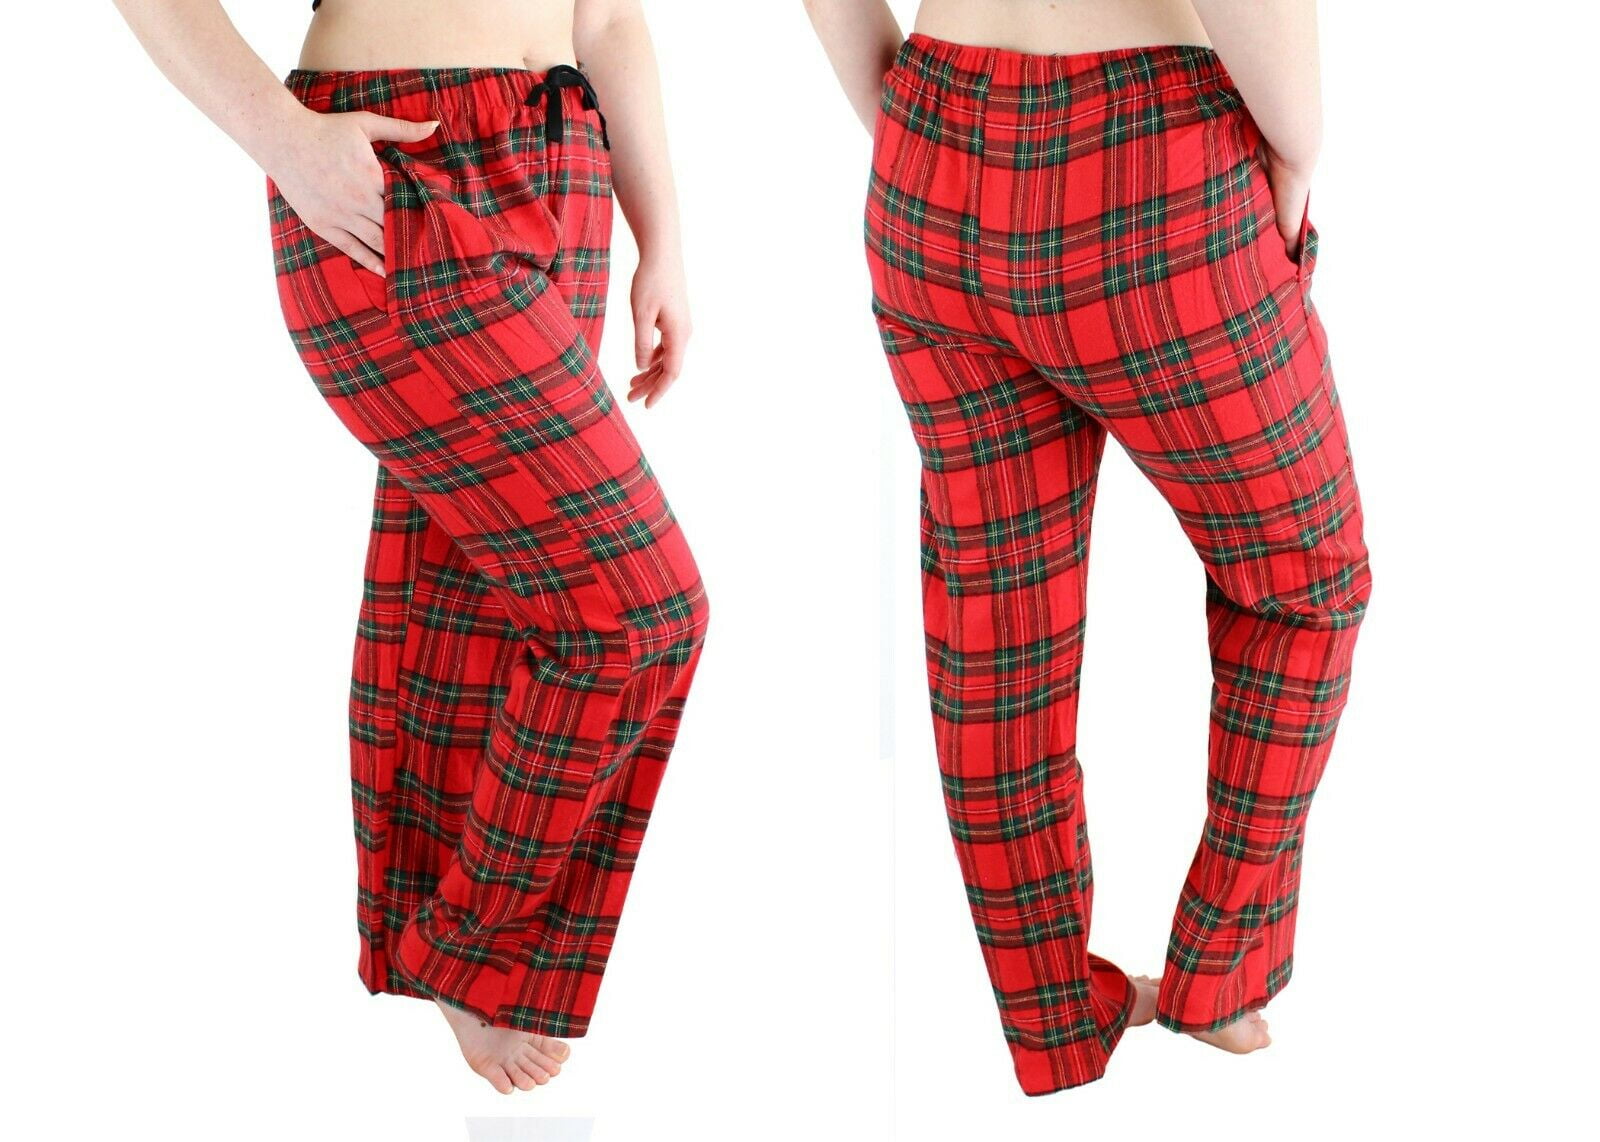 Powerdelux Women's Plaid Pajama Pants Flannel Comfy Soft Pj Lounge Sleep  Bottoms with Pockets Drawstring 